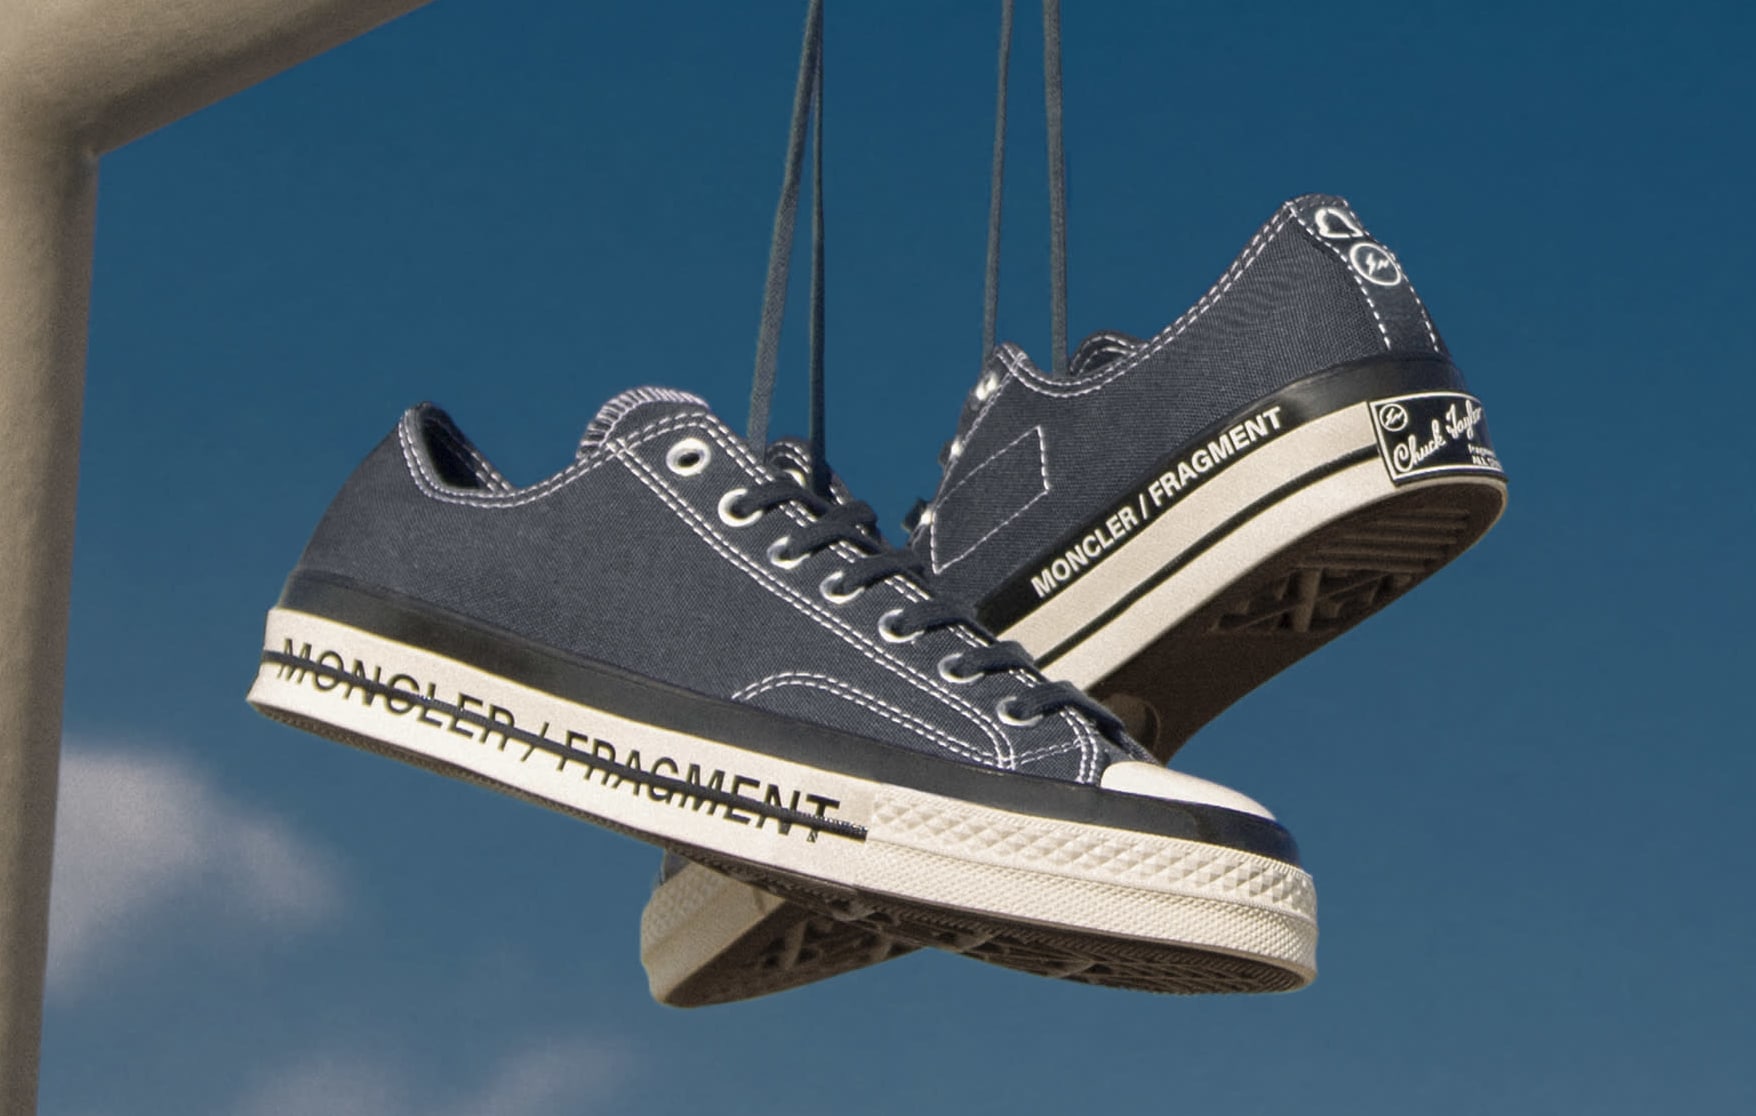 When and Where to Shop the New Converse Collaboration by FRGMT and